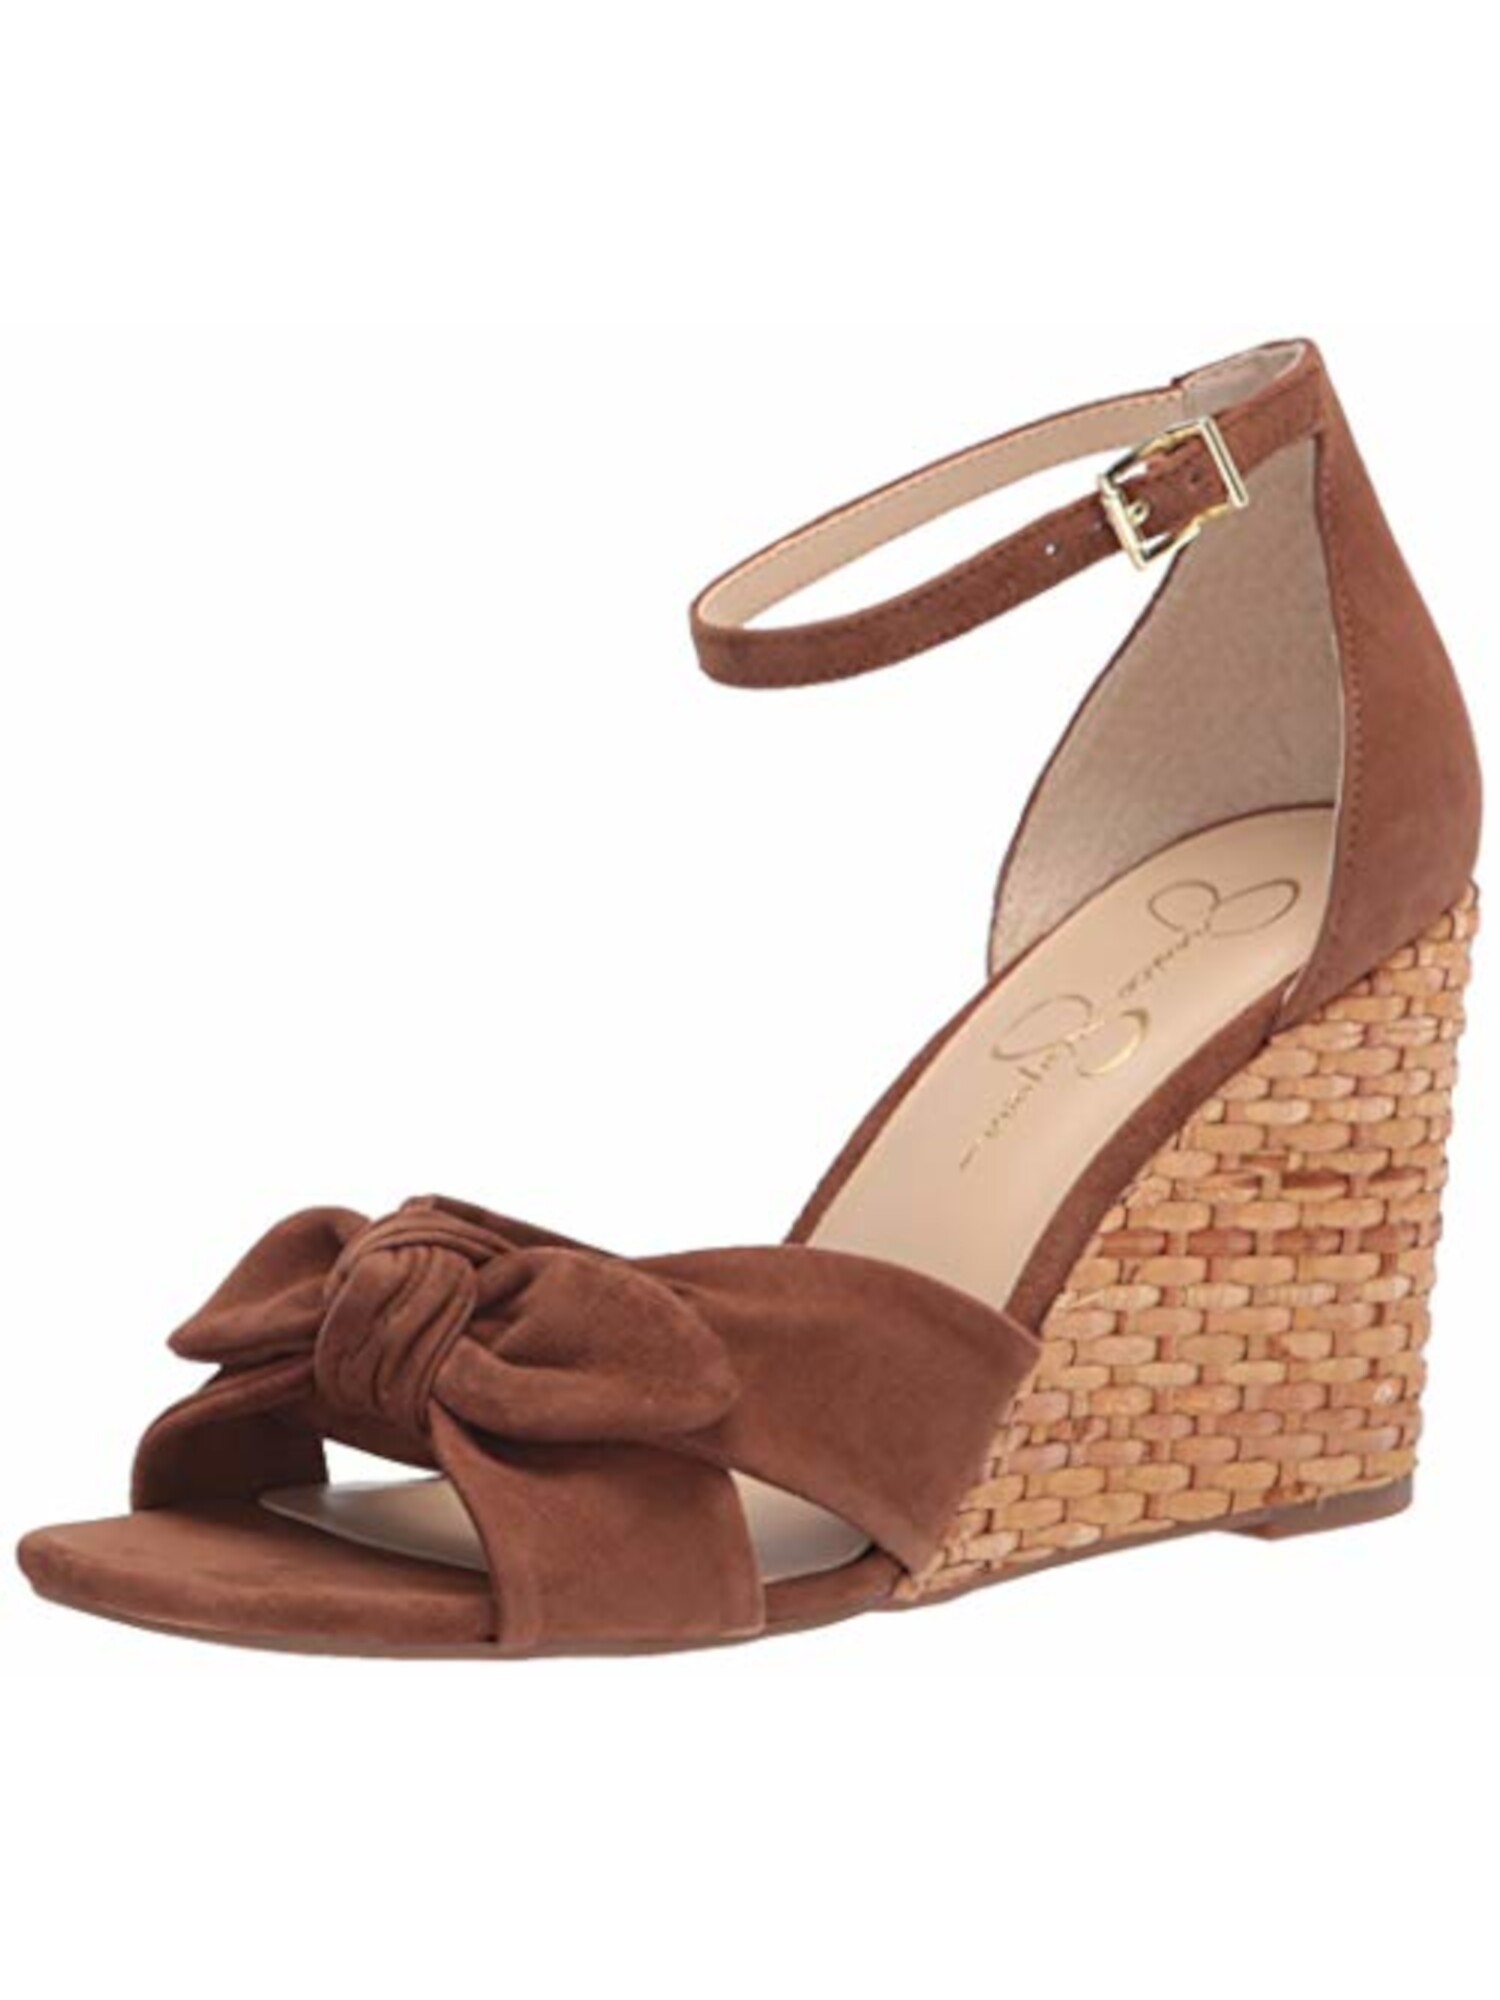 JESSICA SIMPSON Womens Brown Woven Wedge Bow Accent Ankle Strap Delirah Square Toe Wedge Buckle Leather Dress Sandals Shoes 11 M